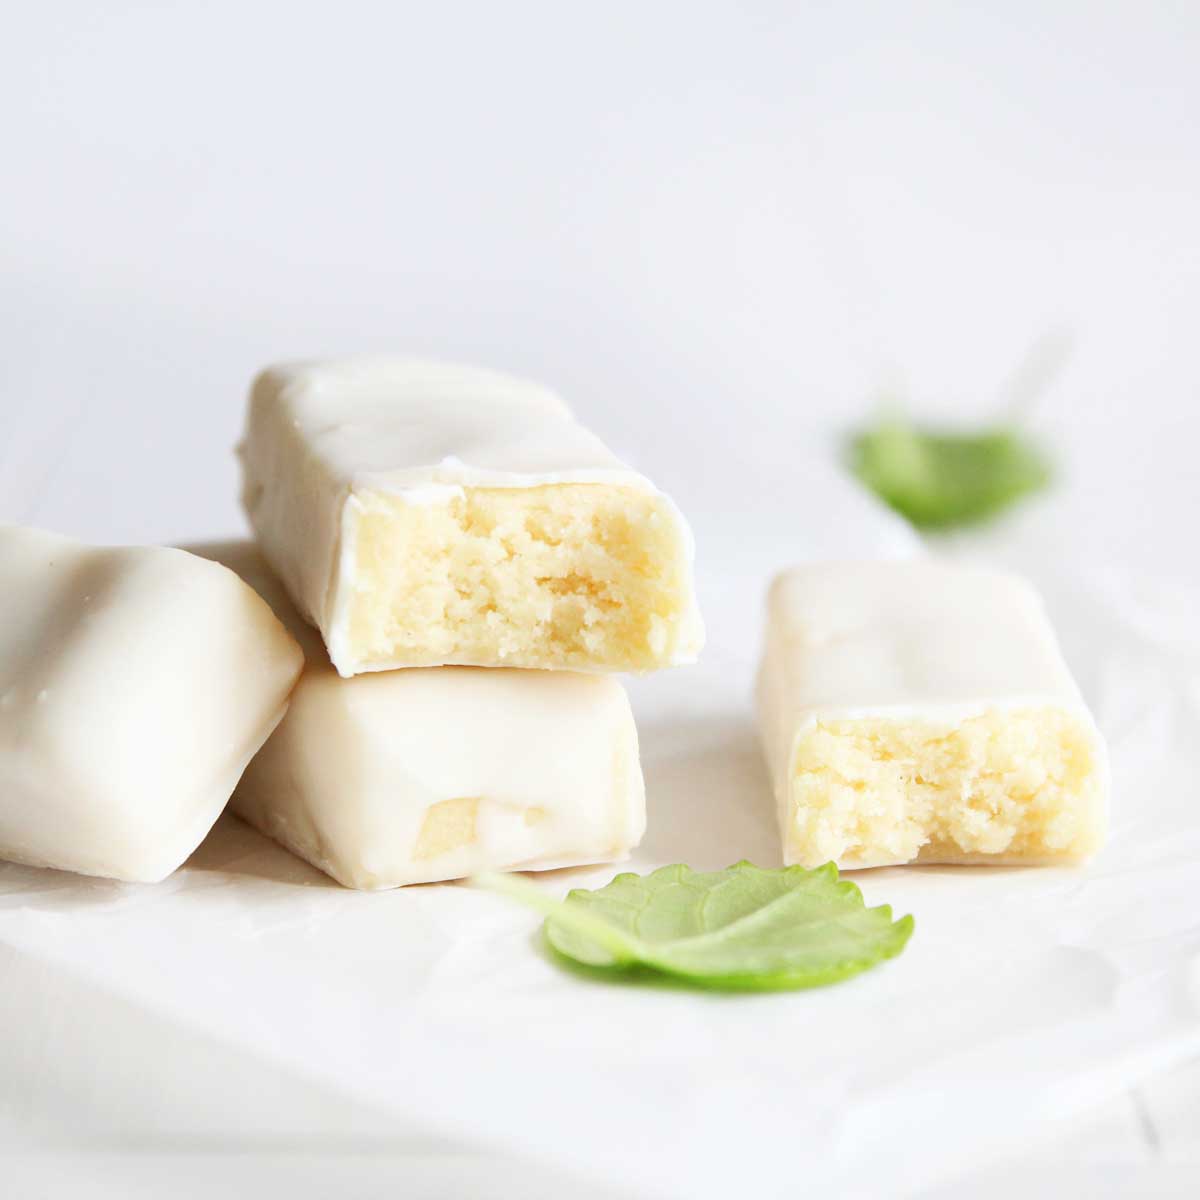 Healthy Homemade Lemon Protein Bars made with Collagen Peptides - PB Fit Protein Bars